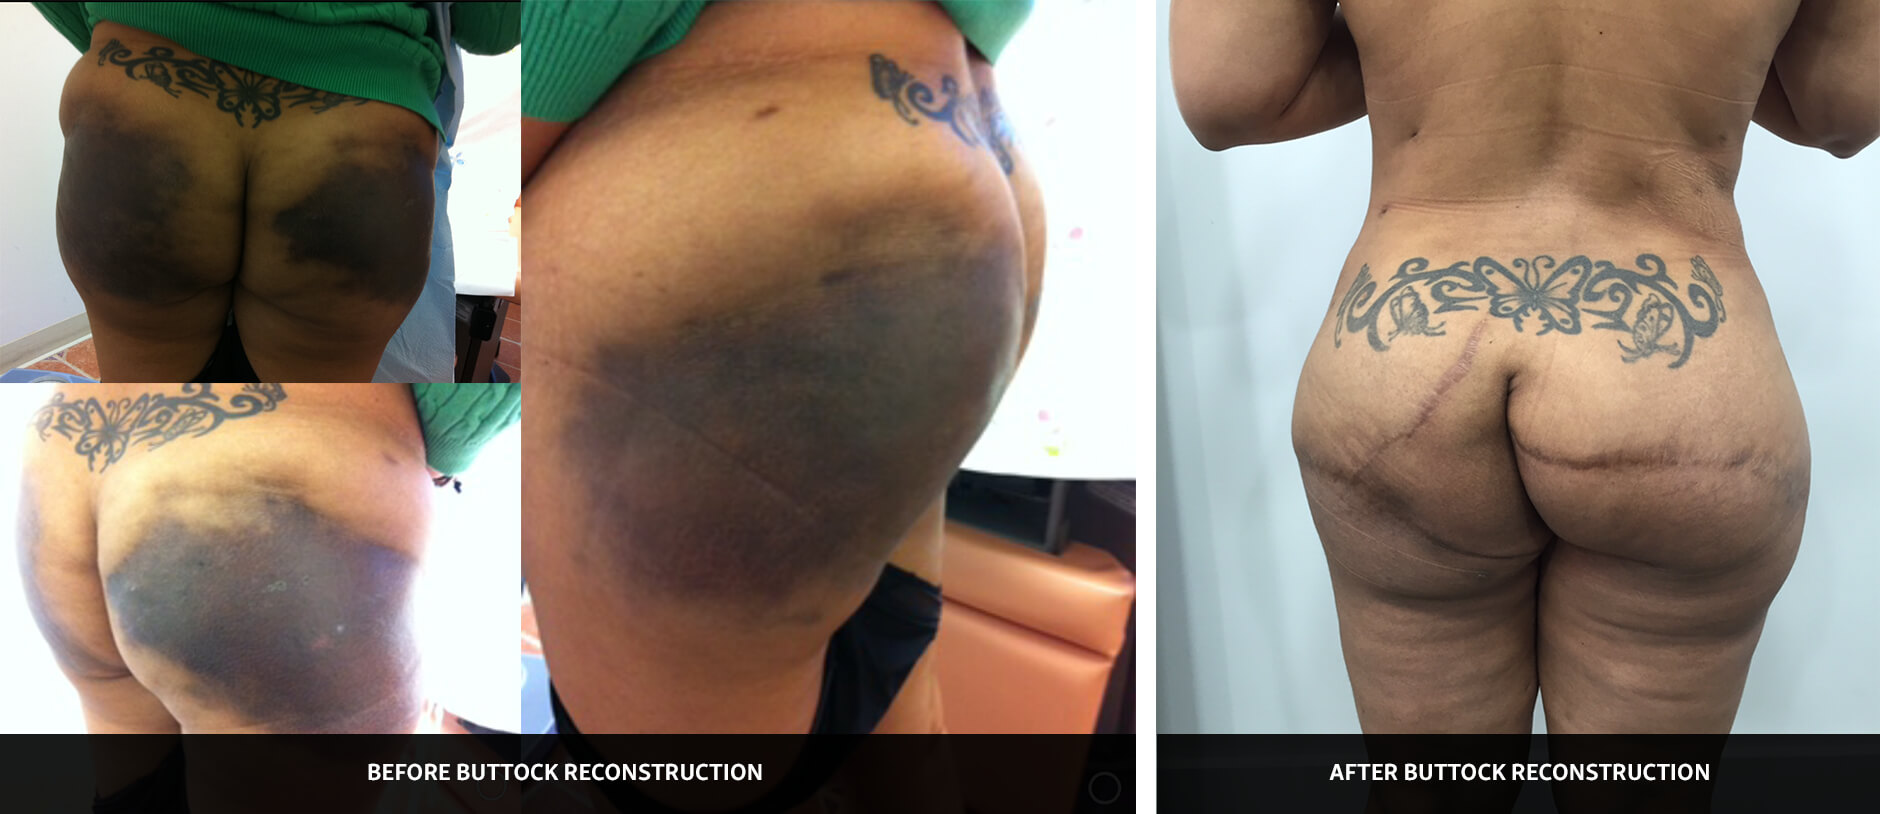 Case Study 02 - before and after photos of buttock reconstruction by Dr. Mir